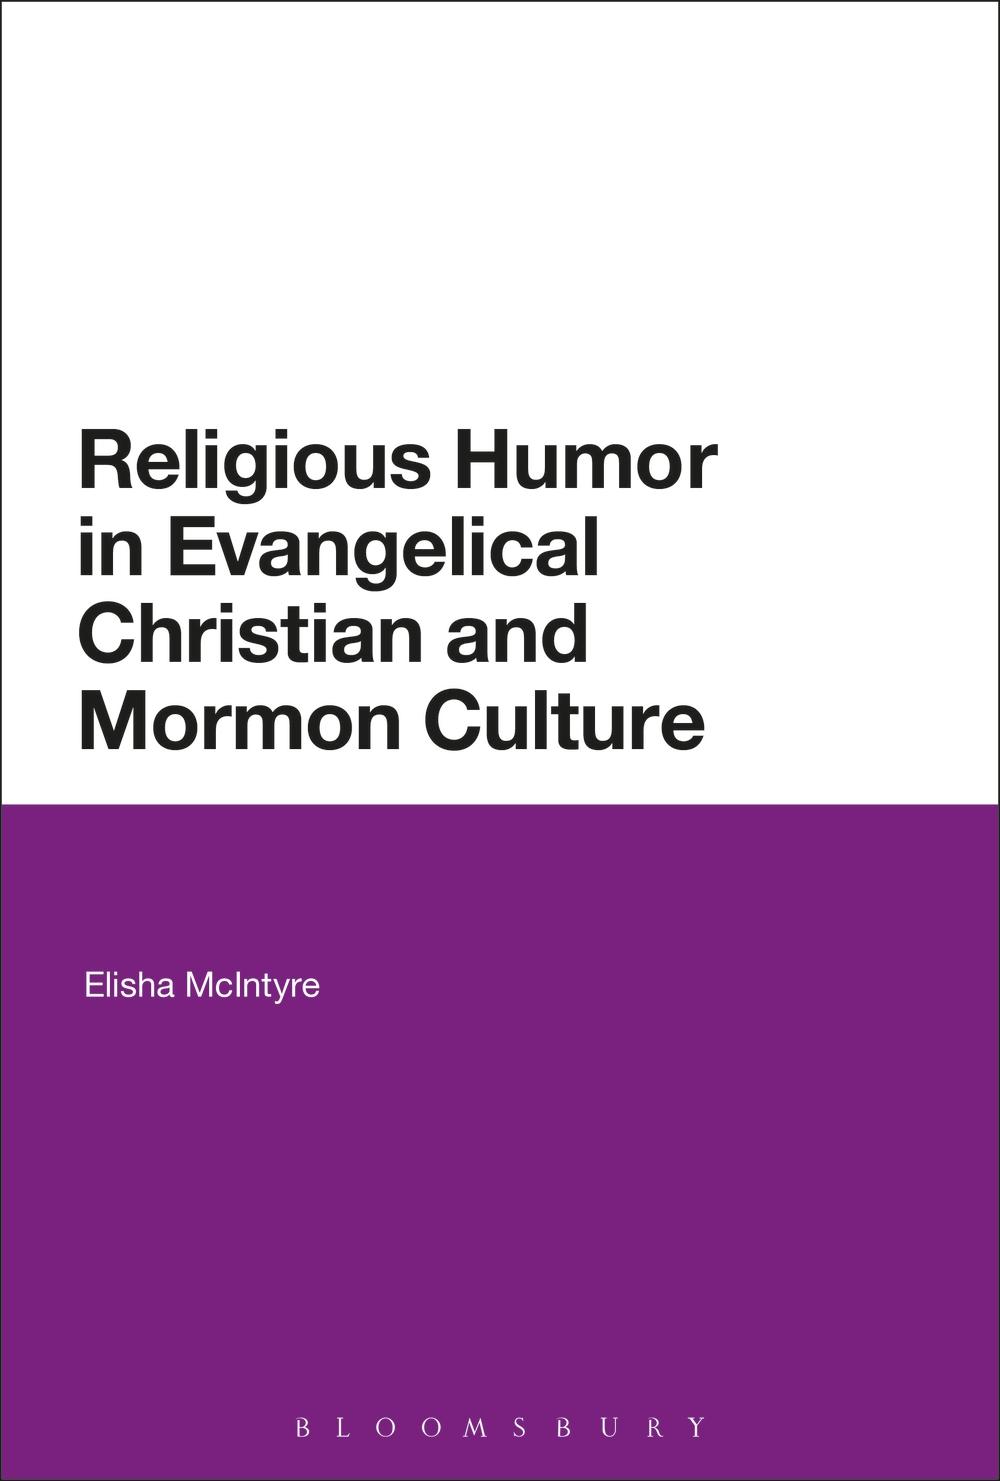 Religious Humor in Evangelical Christian and Mormon Culture - Elisha McIntyre